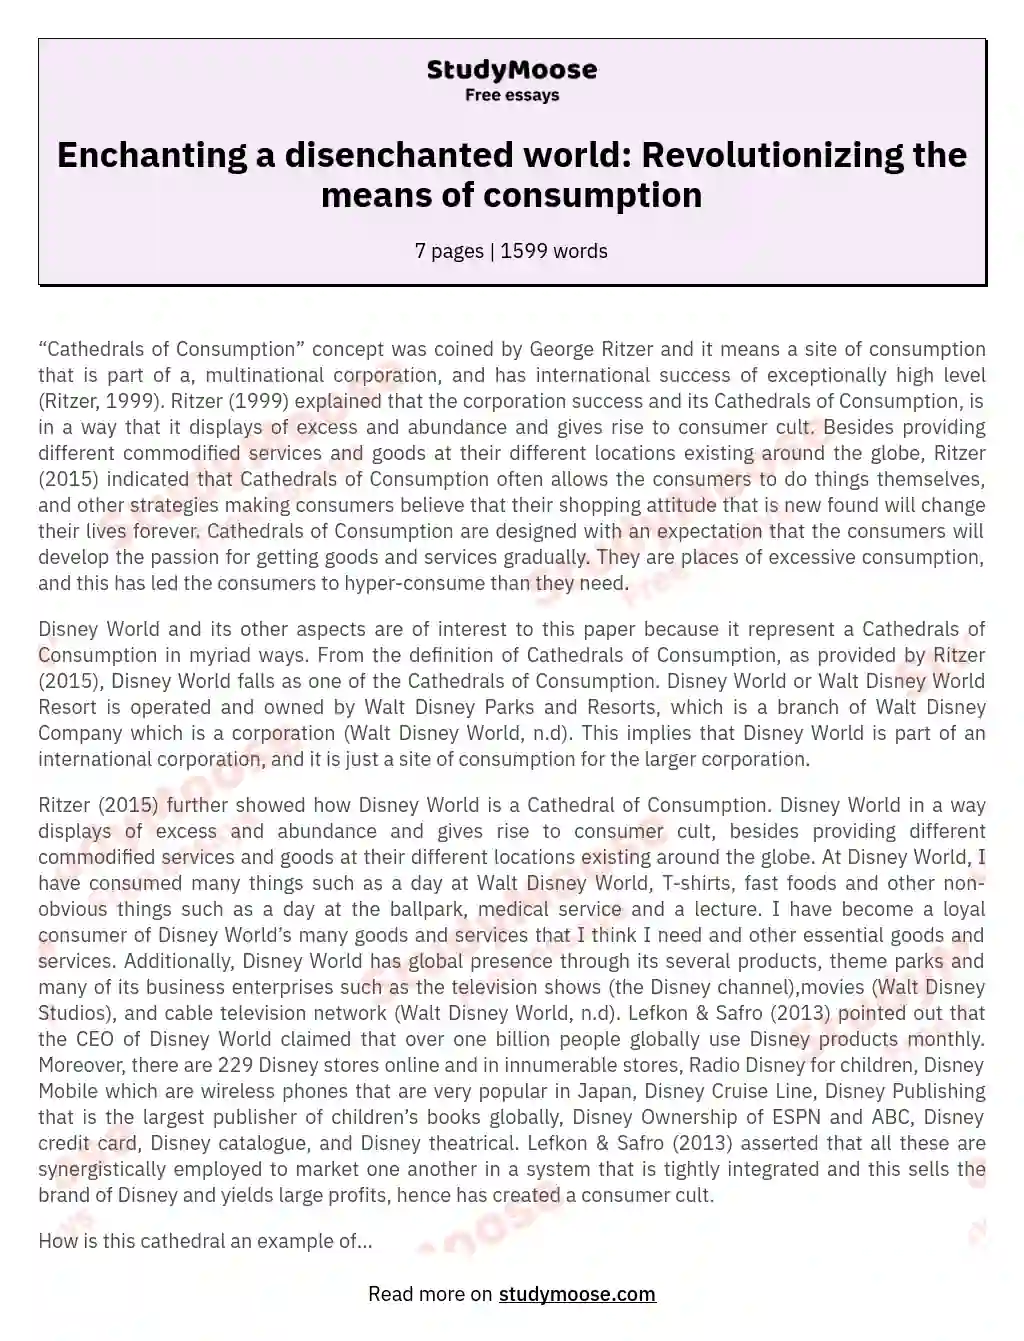 Enchanting a disenchanted world: Revolutionizing the means of consumption essay